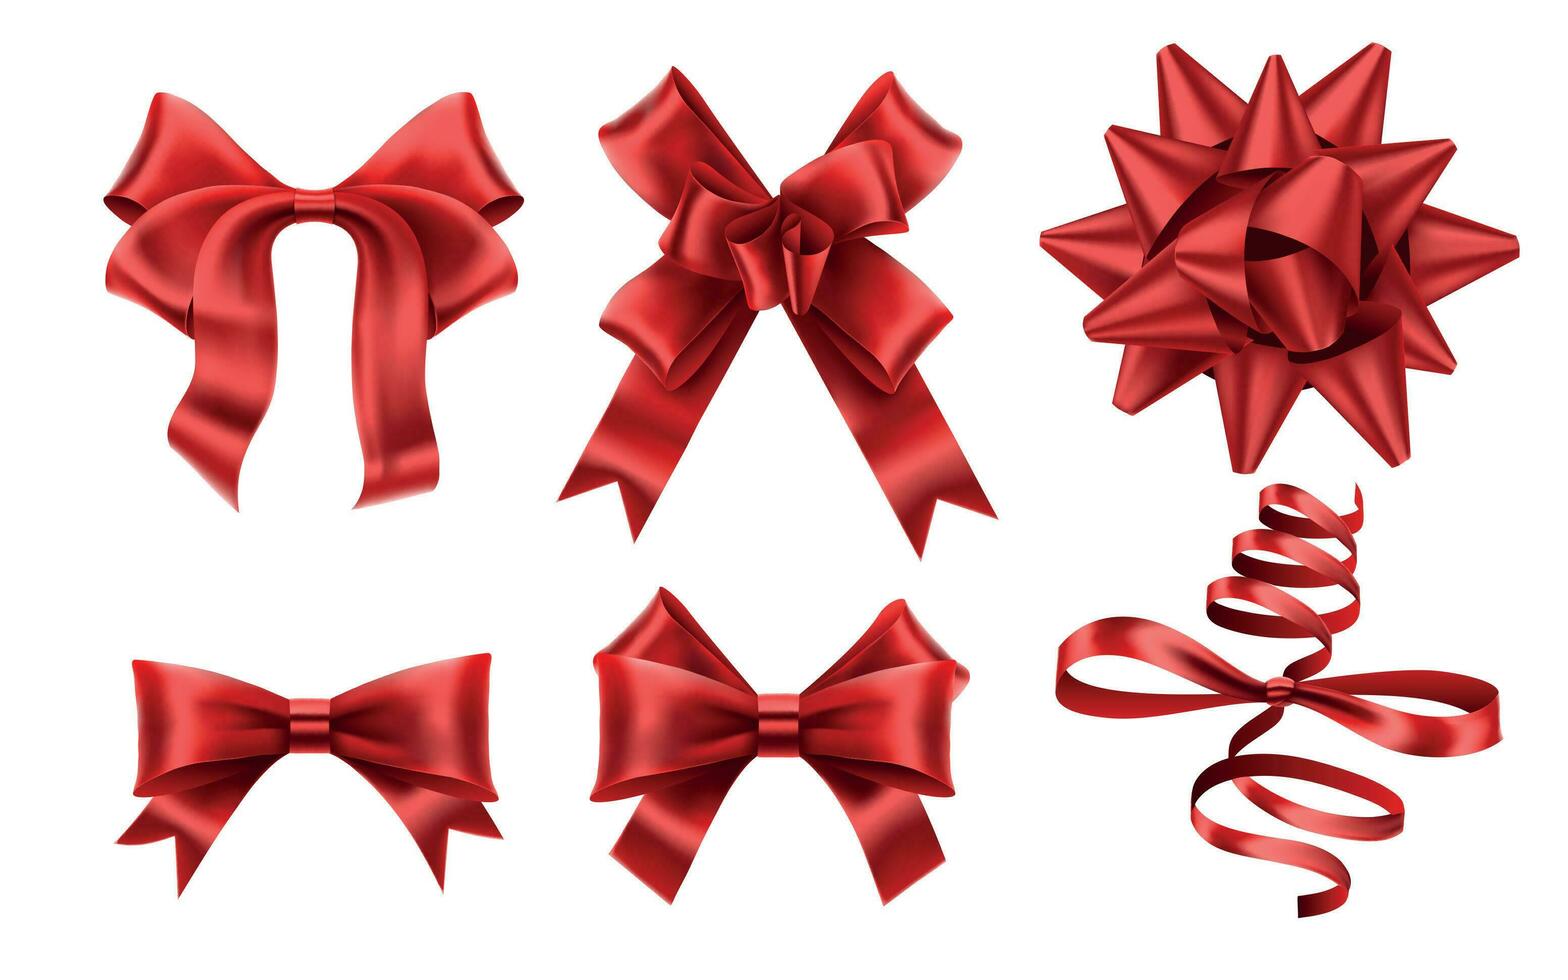 Realistic red bows. Decorative xmas gift ribbon bow, christmas or romance decoration elements vector illustration set